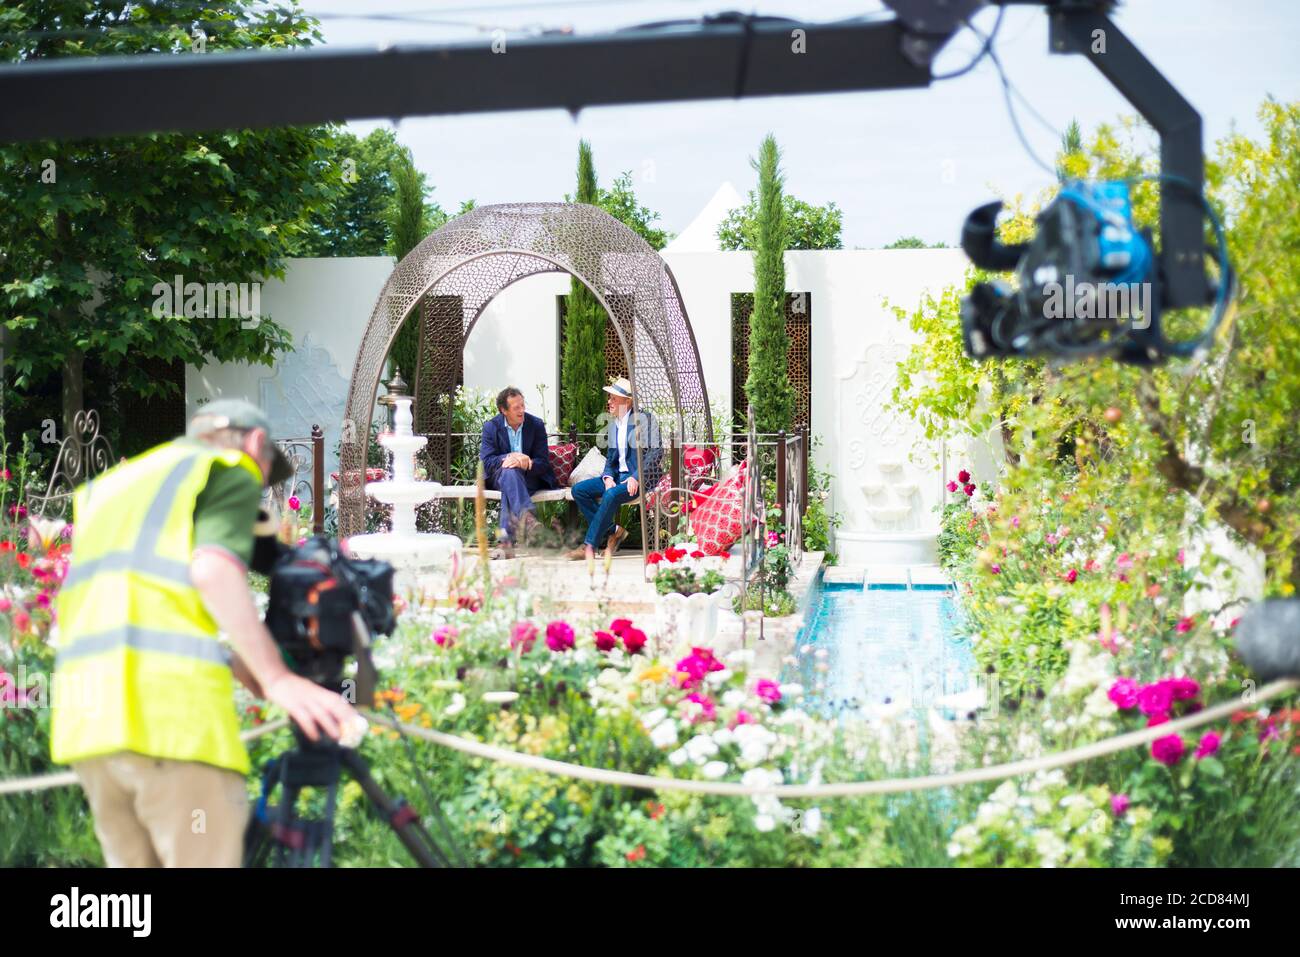 FILMING UNDERWAY WITH MONTY DON AND JOE SWIFT AT THE RHS HAMPTON COURT PALACE FLOWER SHOW 2015 Stock Photo